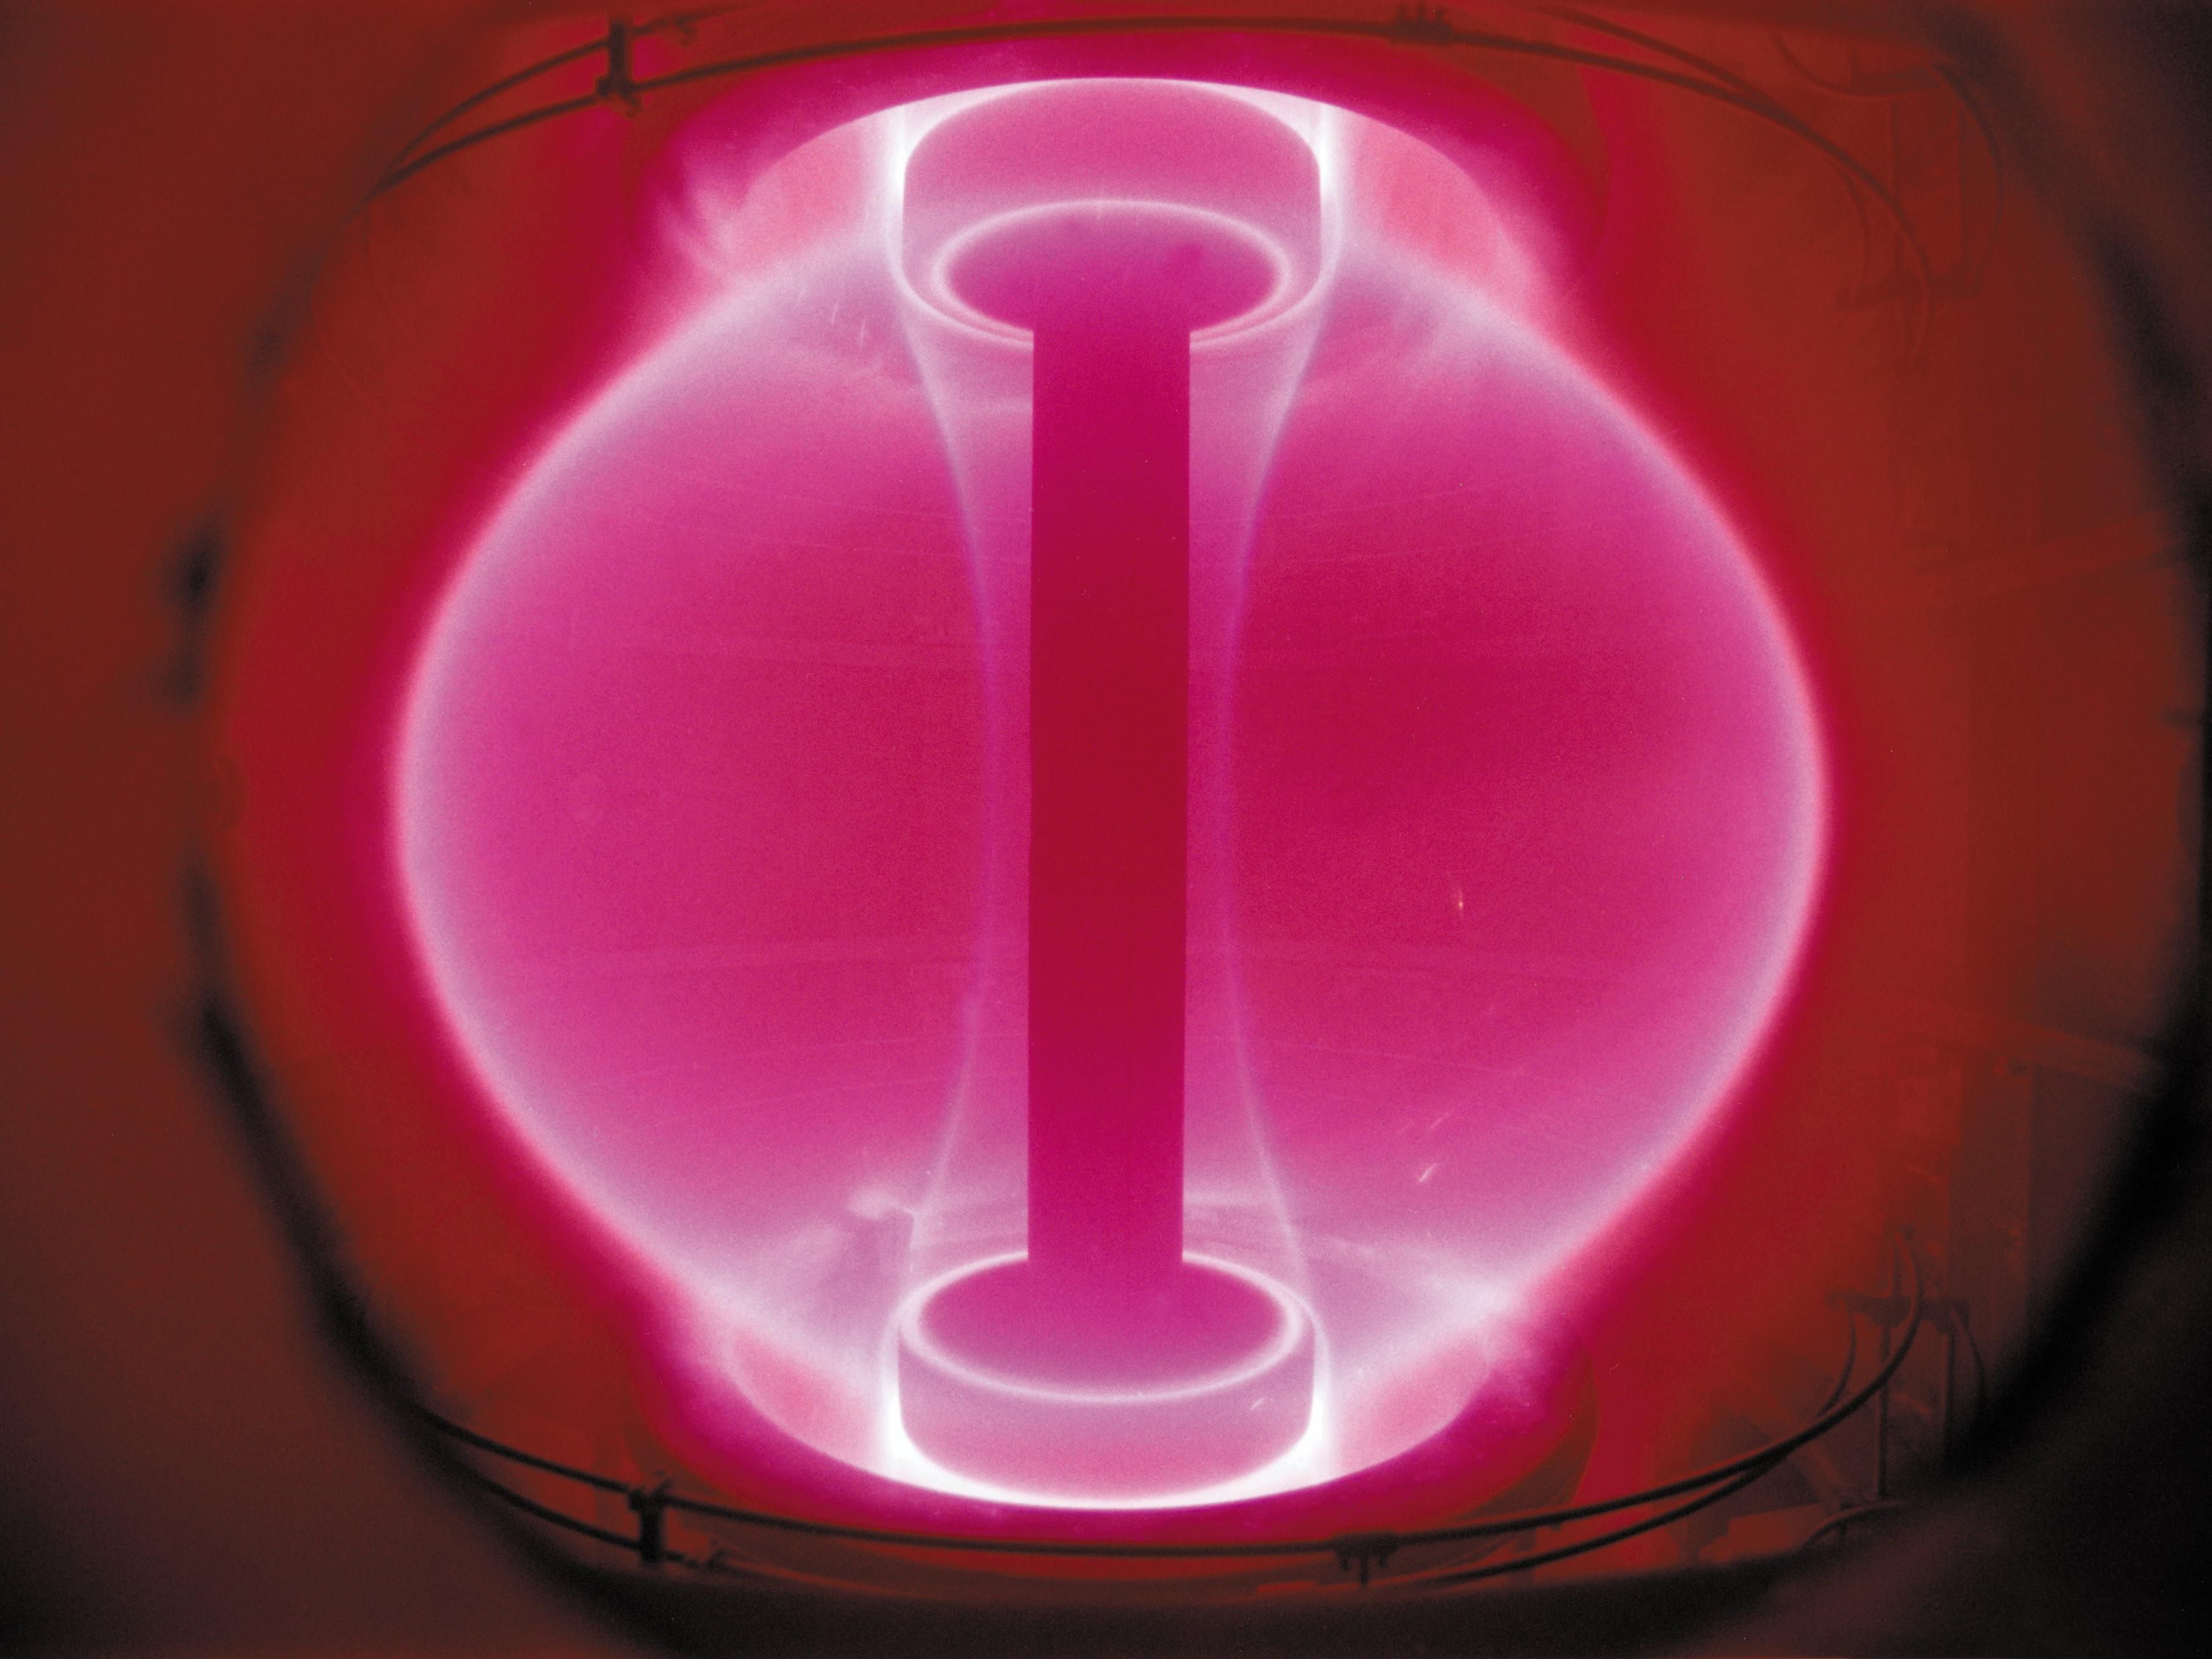 Spherical ball of plasma (pink) in a red colored chamber